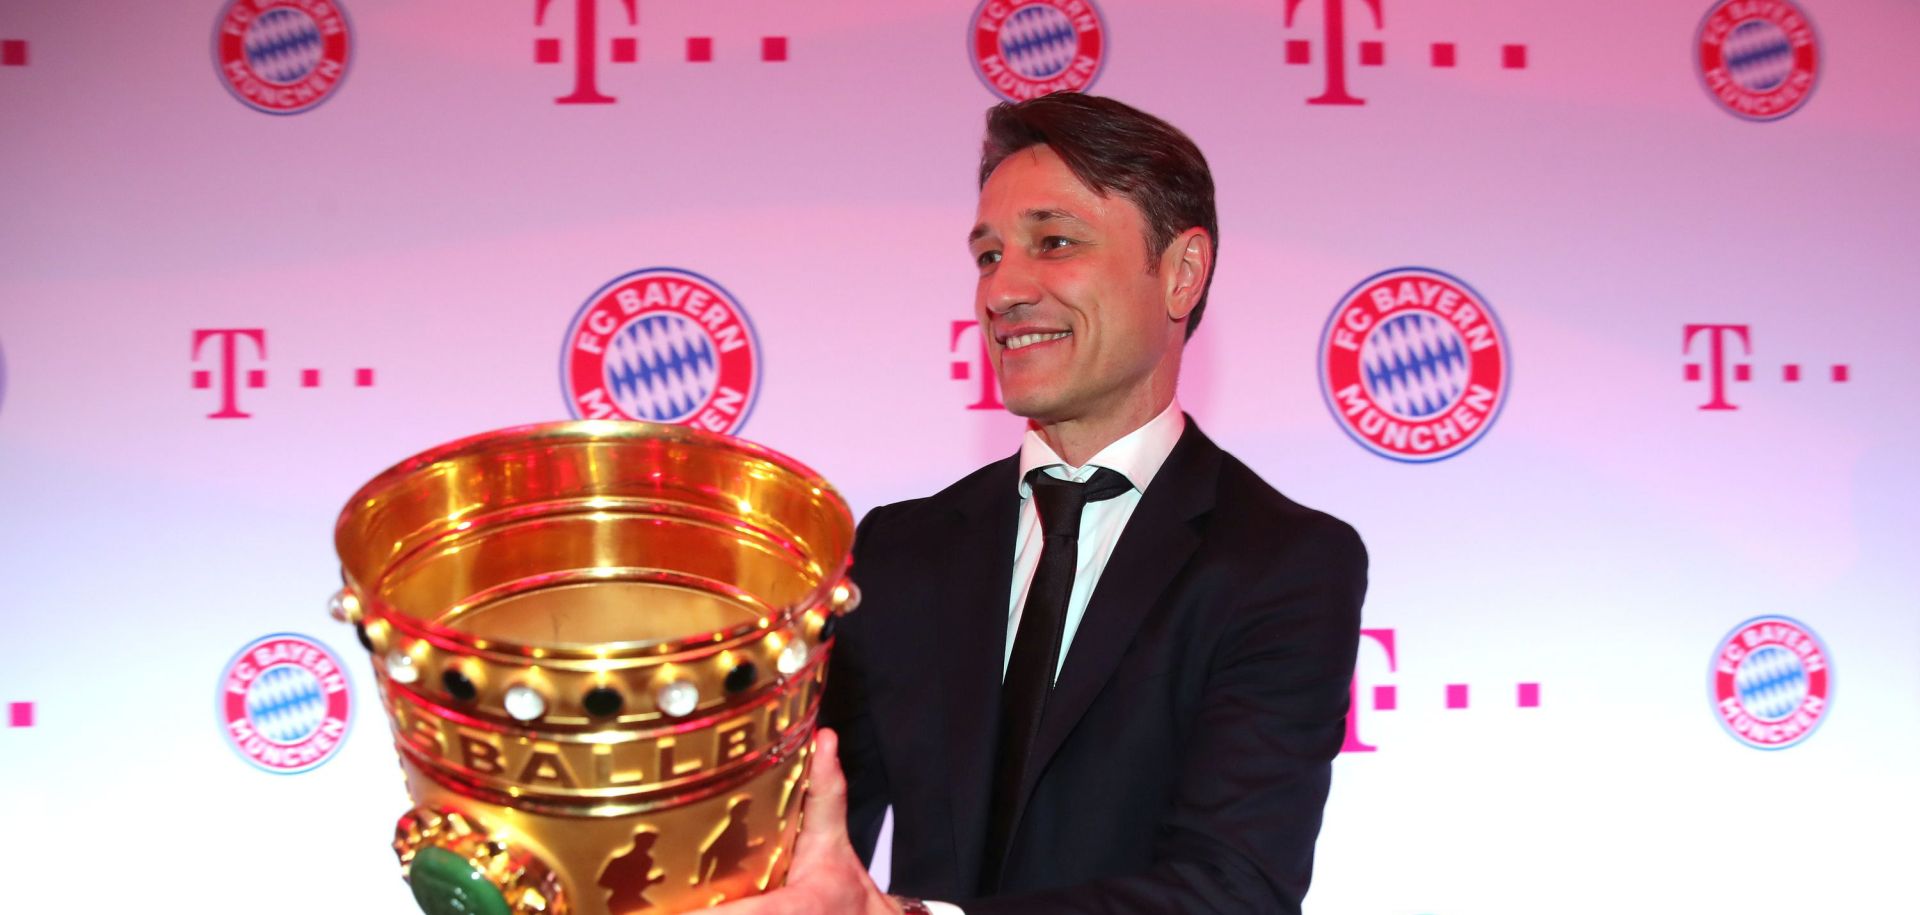 epa07601790 Bayern's head coach Niko Kovac poses with the German DFB Cup trophy during the FC Bayern Muenchen DFB Cup final's night 2019 at Deutsche Telekom's representative office in Berlin, Germany, 26 May 2019.  EPA/ALEXANDER HESSENSTEIN / POOL